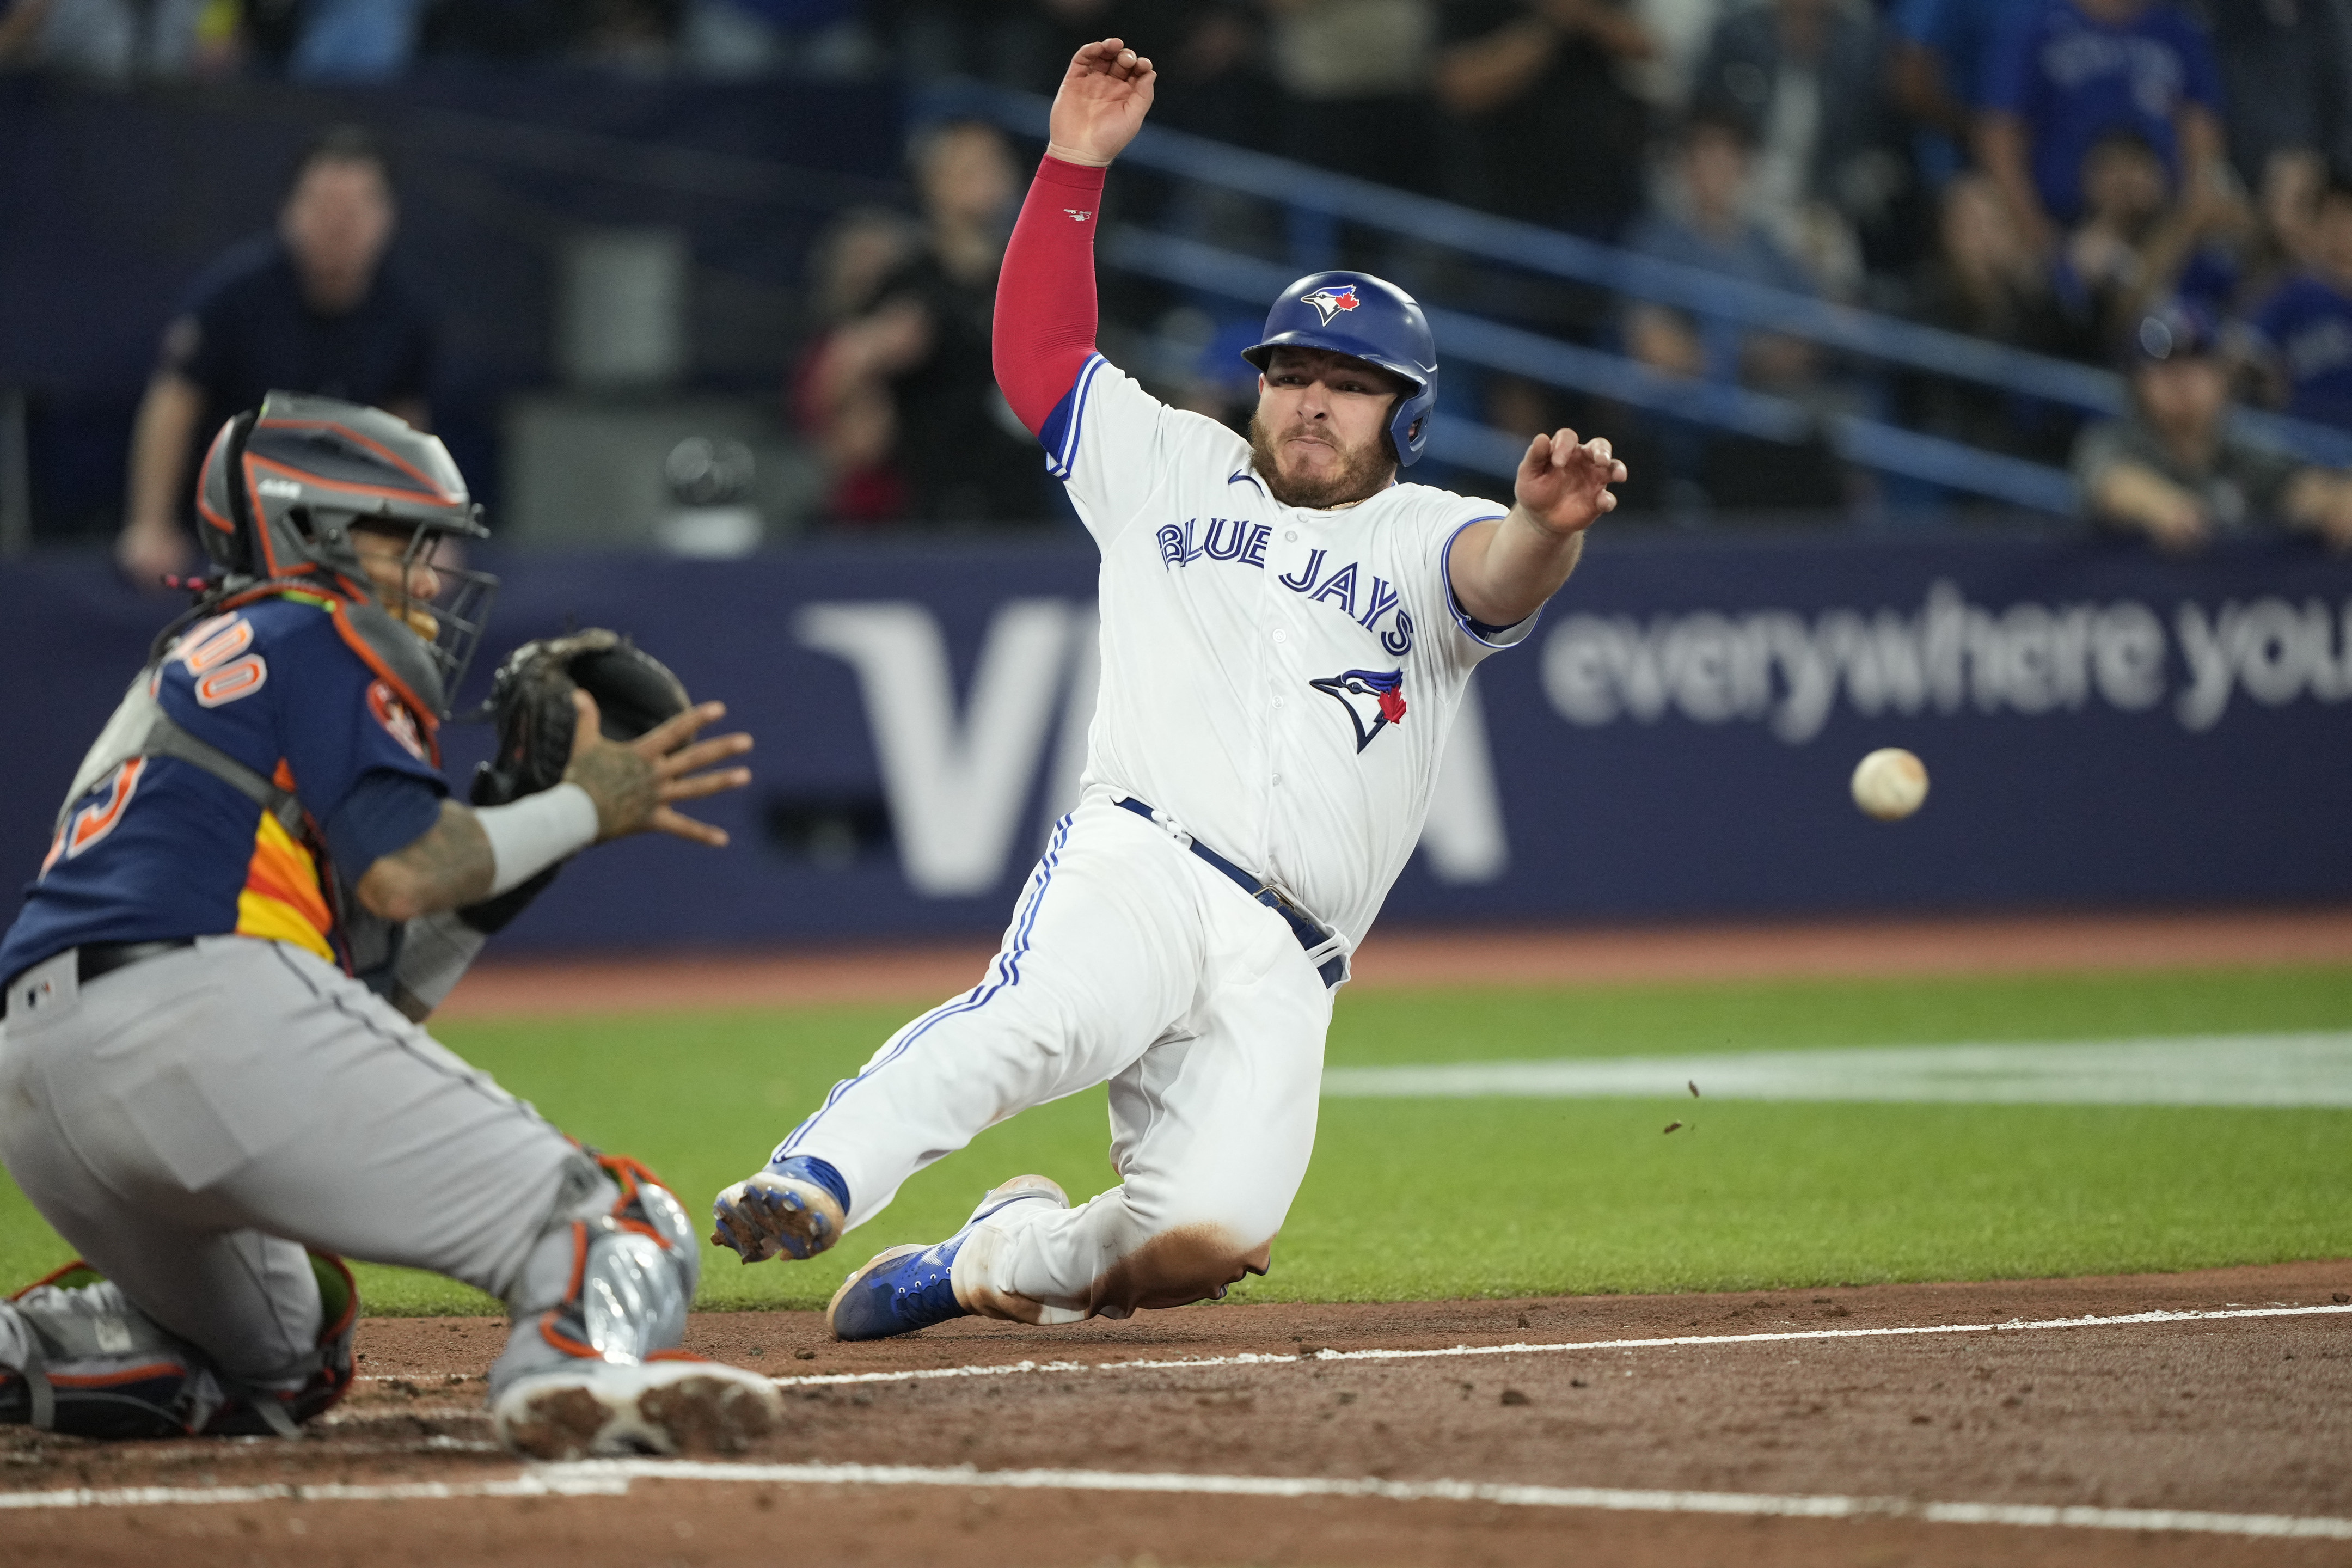 Blue Jays win third straight over Astros